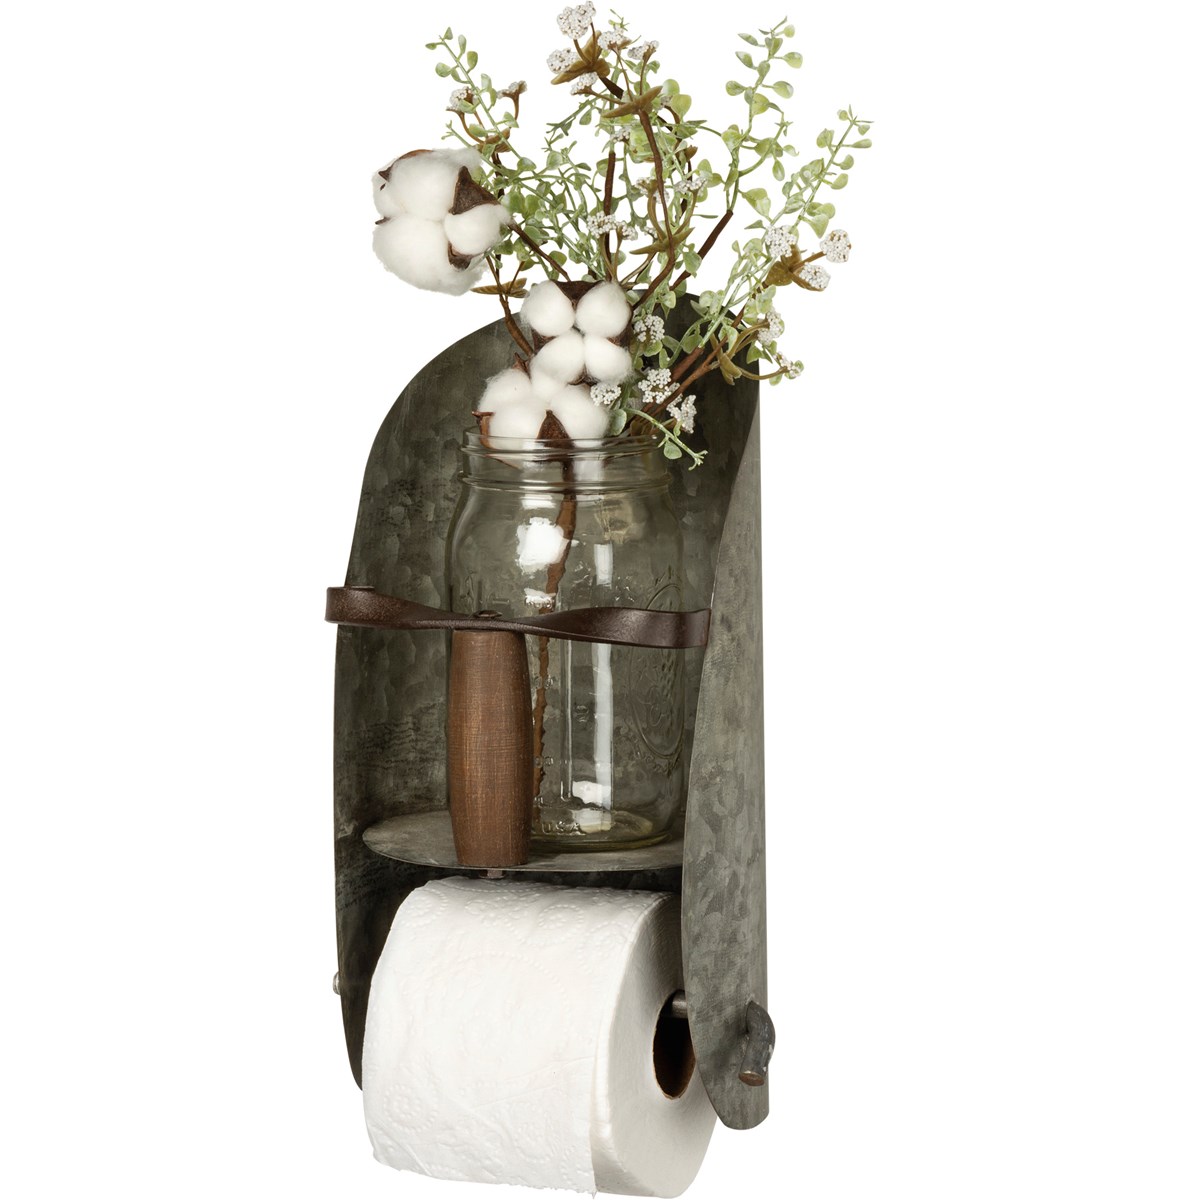 28 in. Freestanding Pipe Toilet Paper Holder with Wood Shelf, Boulder —  PIPE DECOR